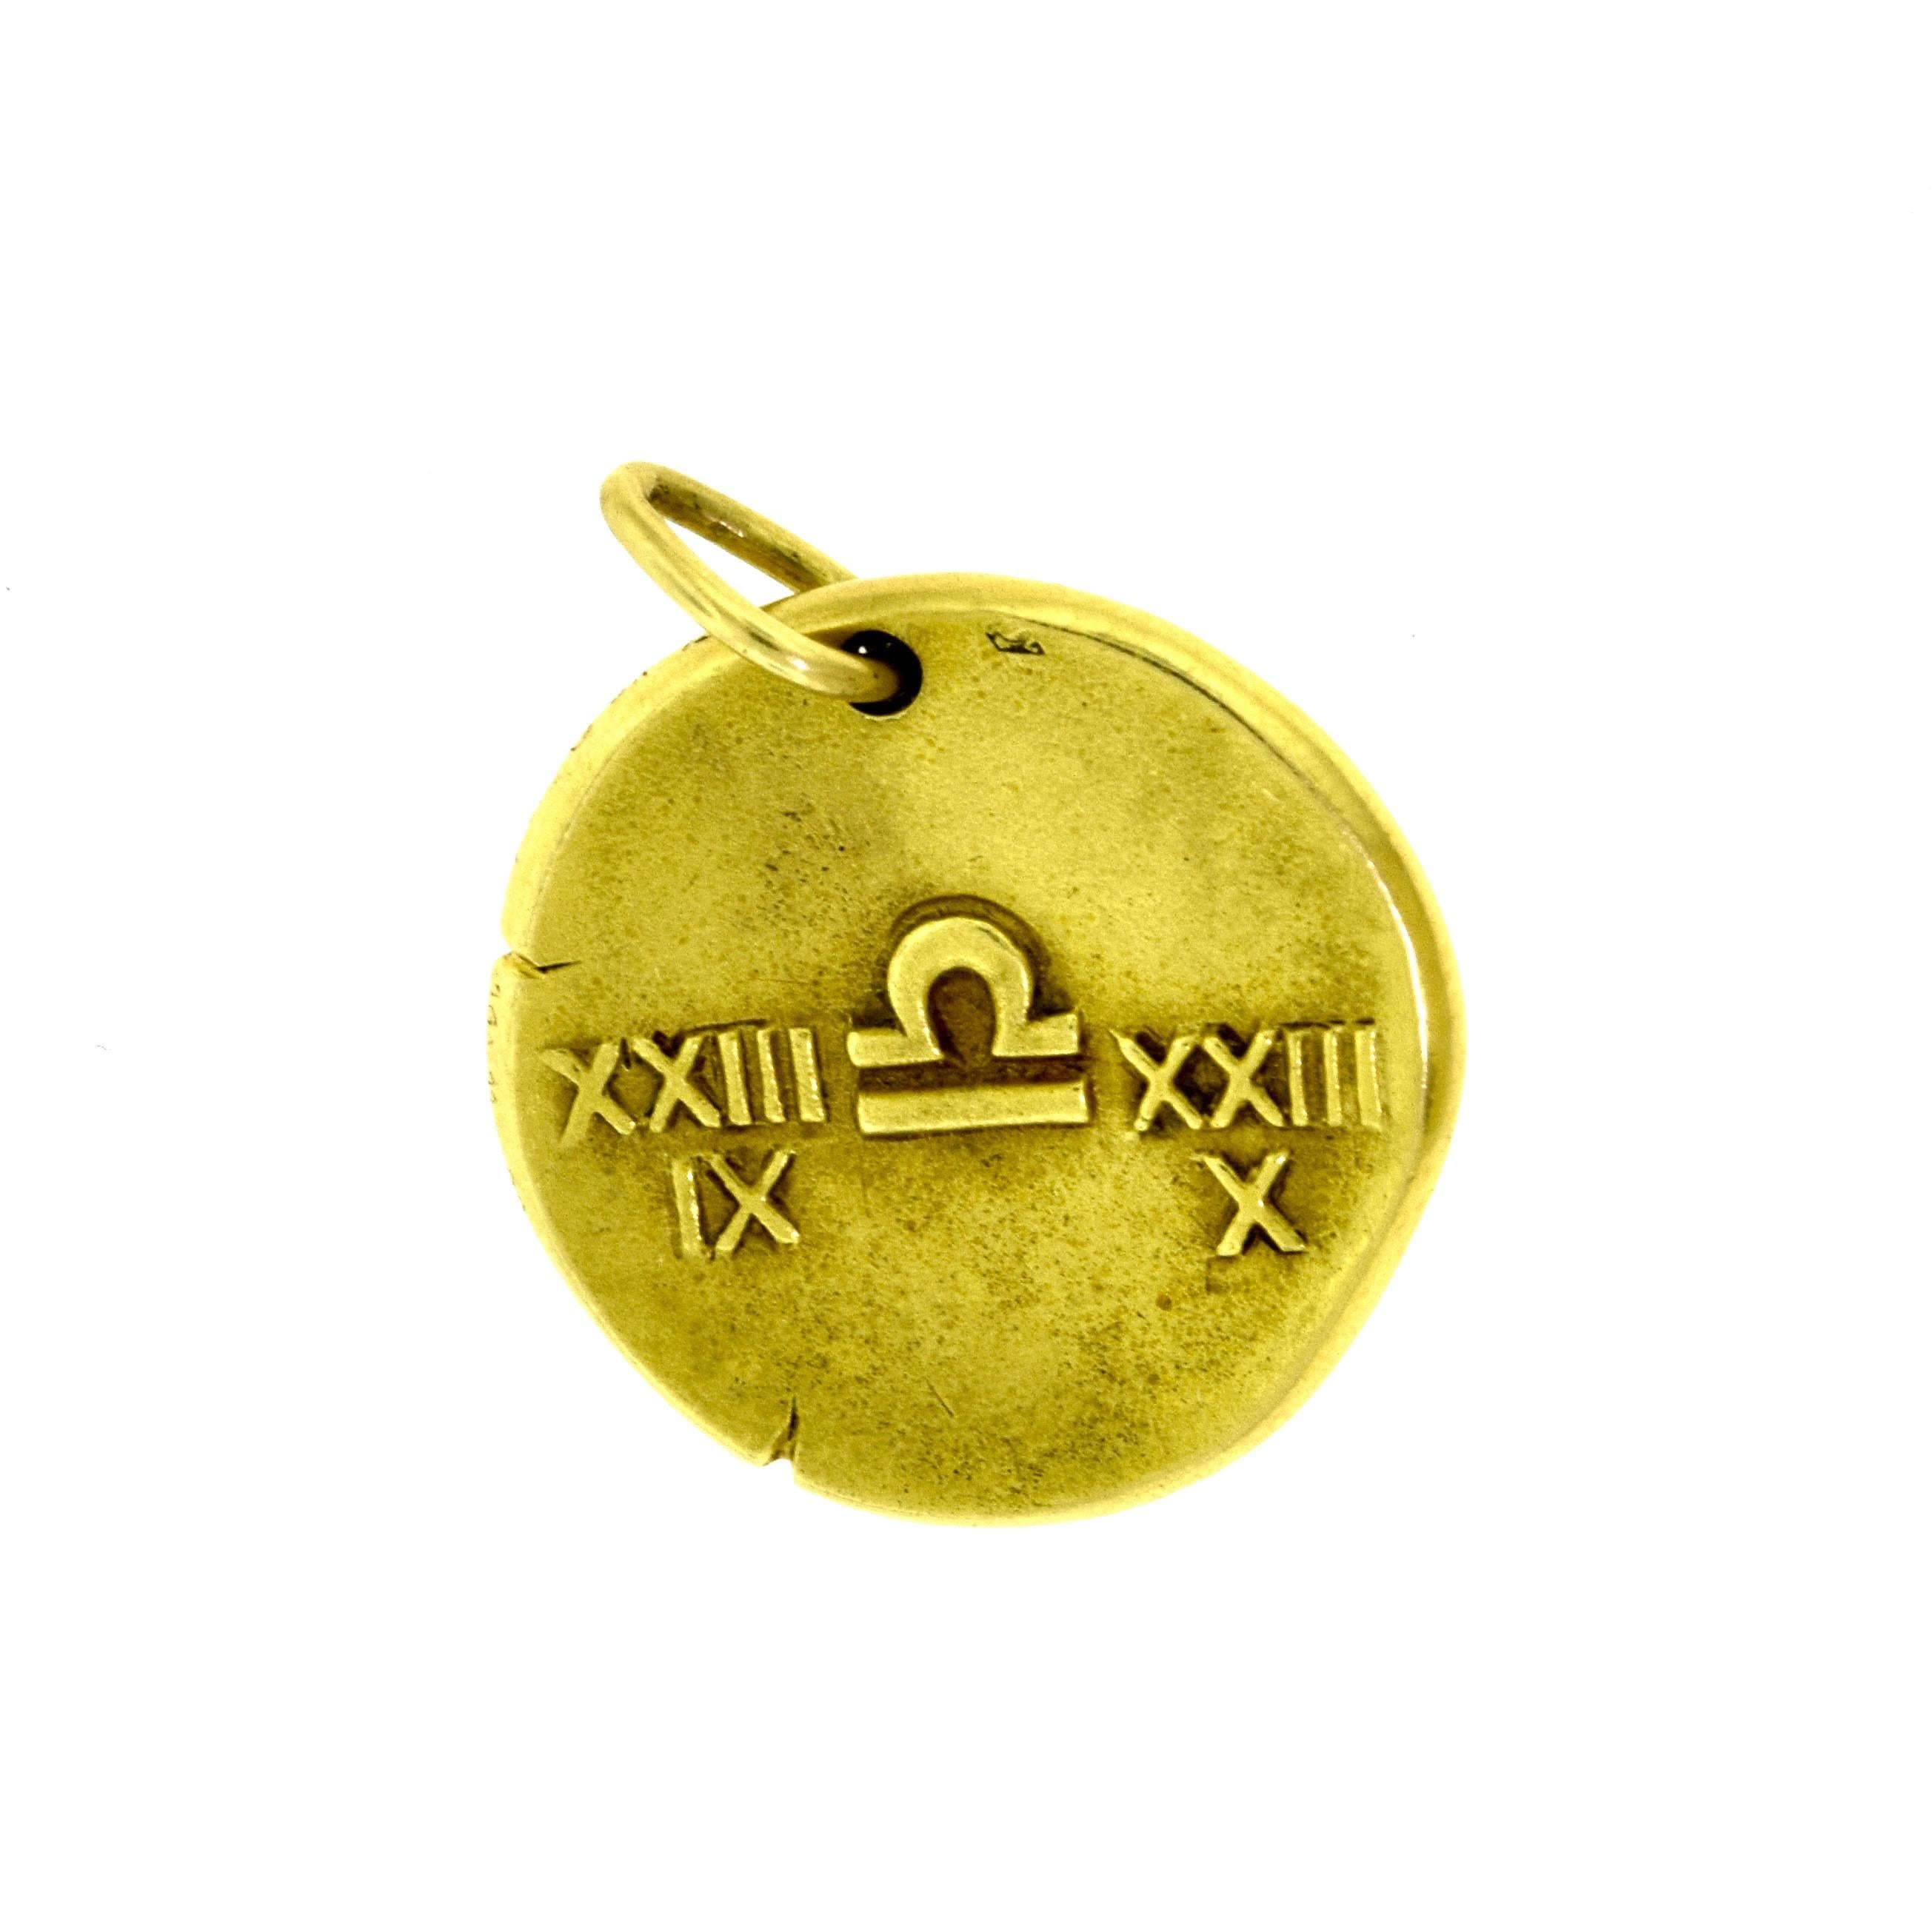 Designer: Van Cleef & Arpels
Metal: 18 KaratYellow Gold
Total Item Weight (g): 16.2
Diameter: approx. 27 mm
Thickness: 2.98 mm
Hallmark: VCA 750 OR Serial Number

Libra Zodiac medallion pendant in 18k yellow gold, designed to resemble an ancient